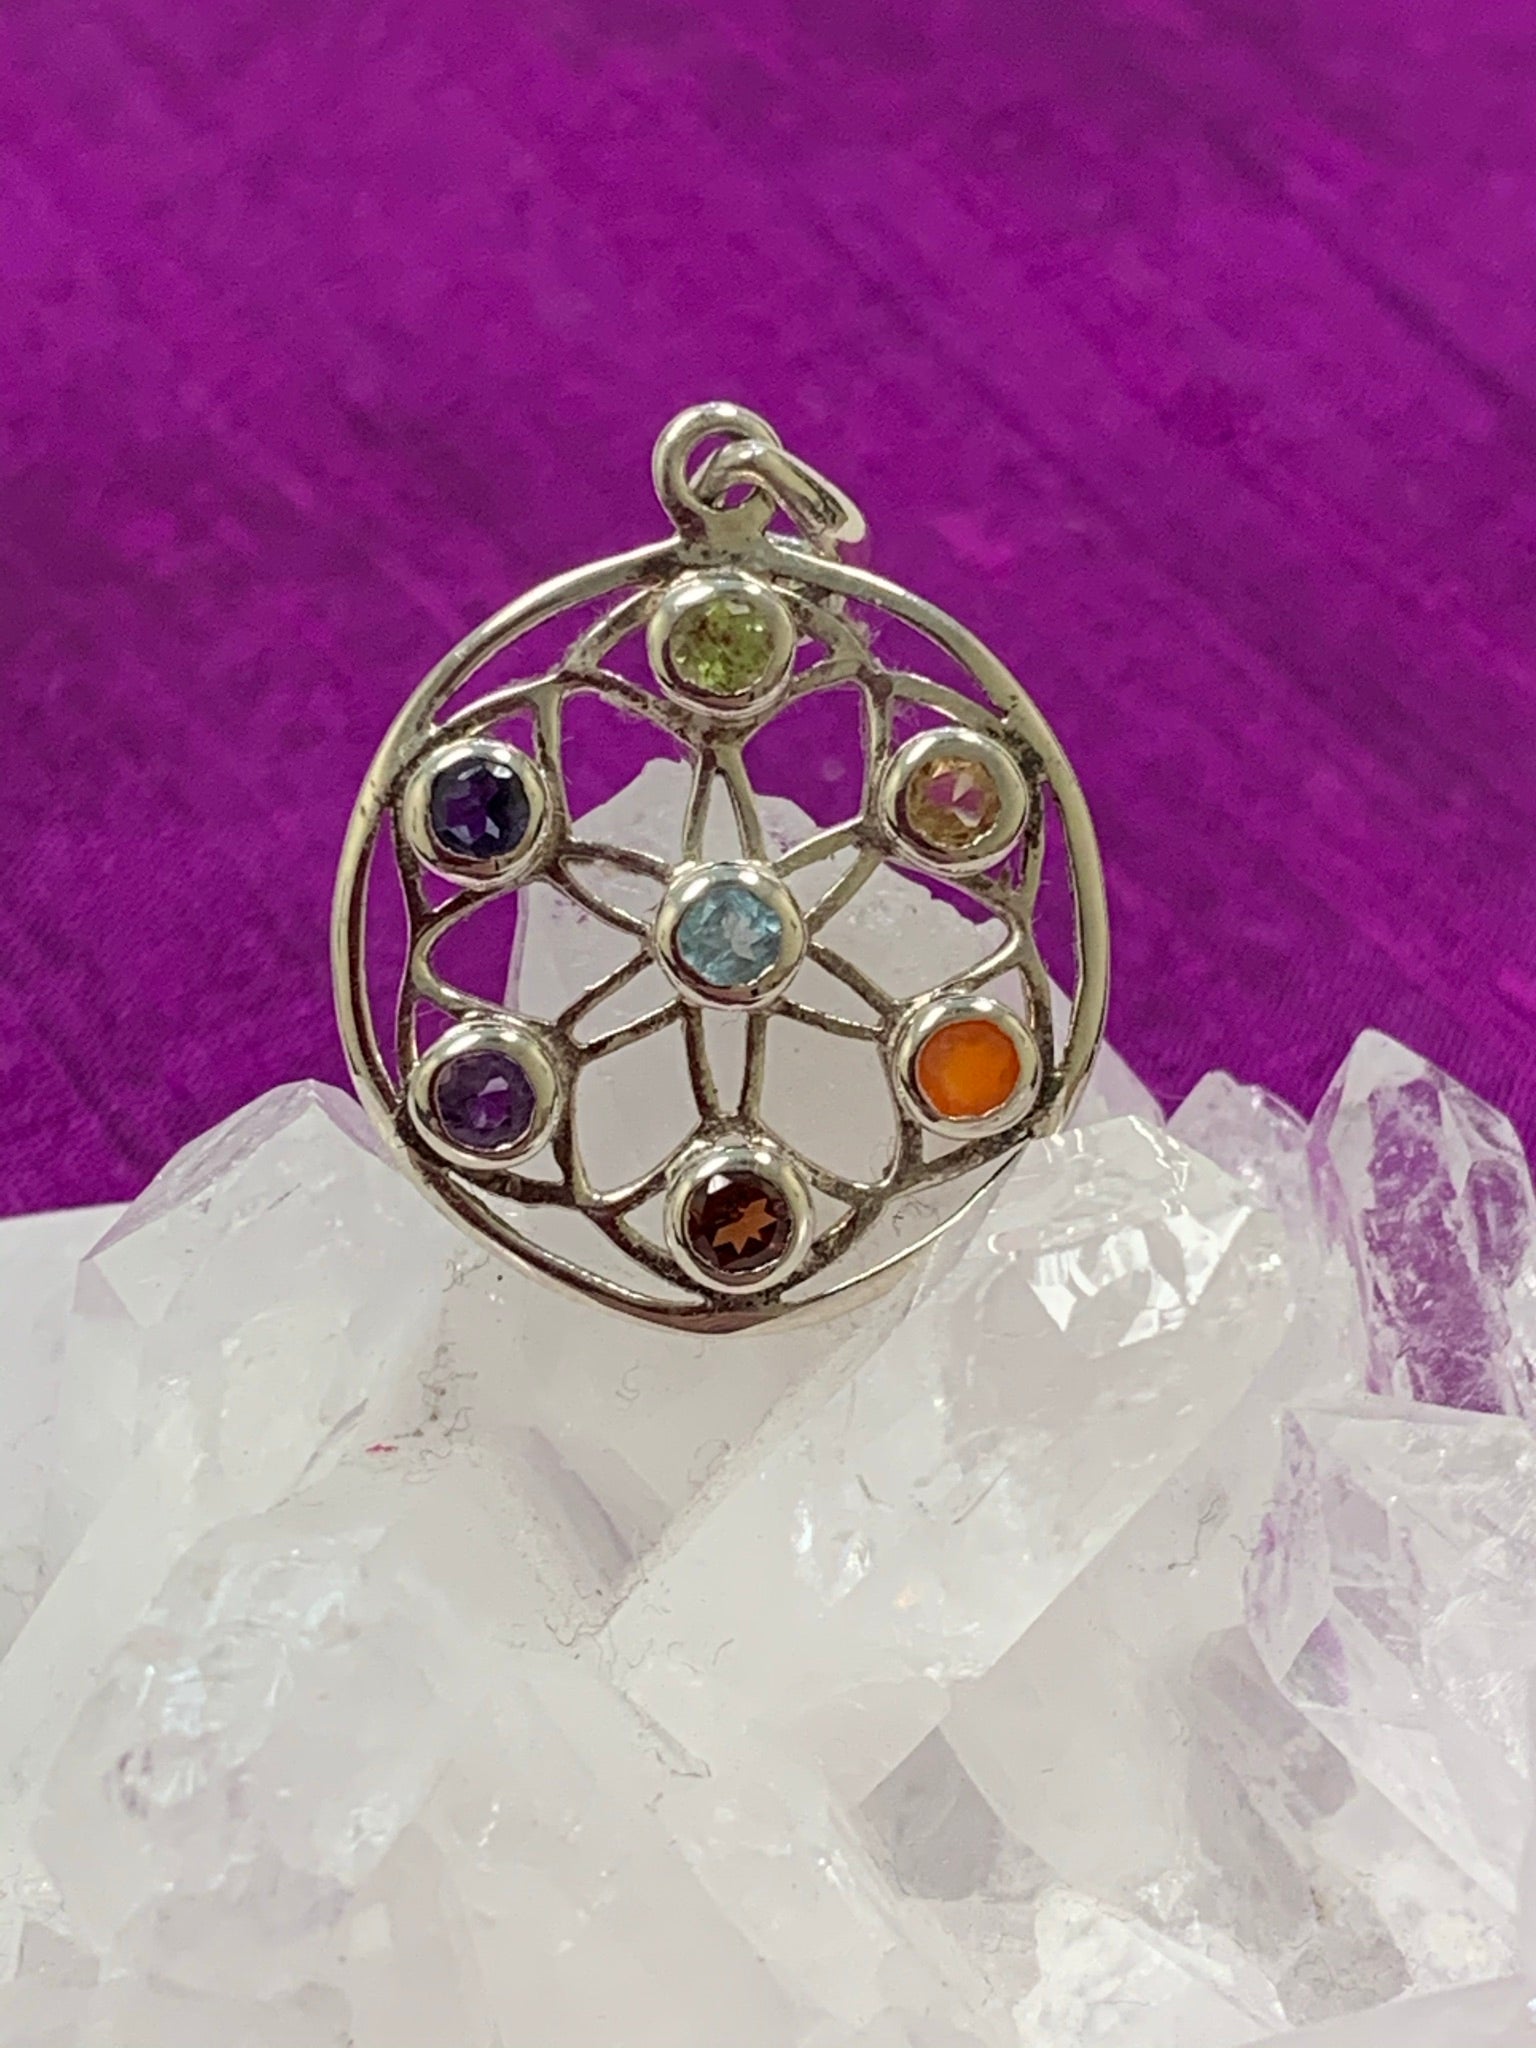 Second close-up view. Beautiful chakra wheel pendant with seven small faceted stones around the wheel, each representing one of the 7 major chakras. Stones are set in sterling silver wheel. Chakras are energy centers in our bodies that process energy - coming into and flowing out of the body. The pendant is approximately 1¼".